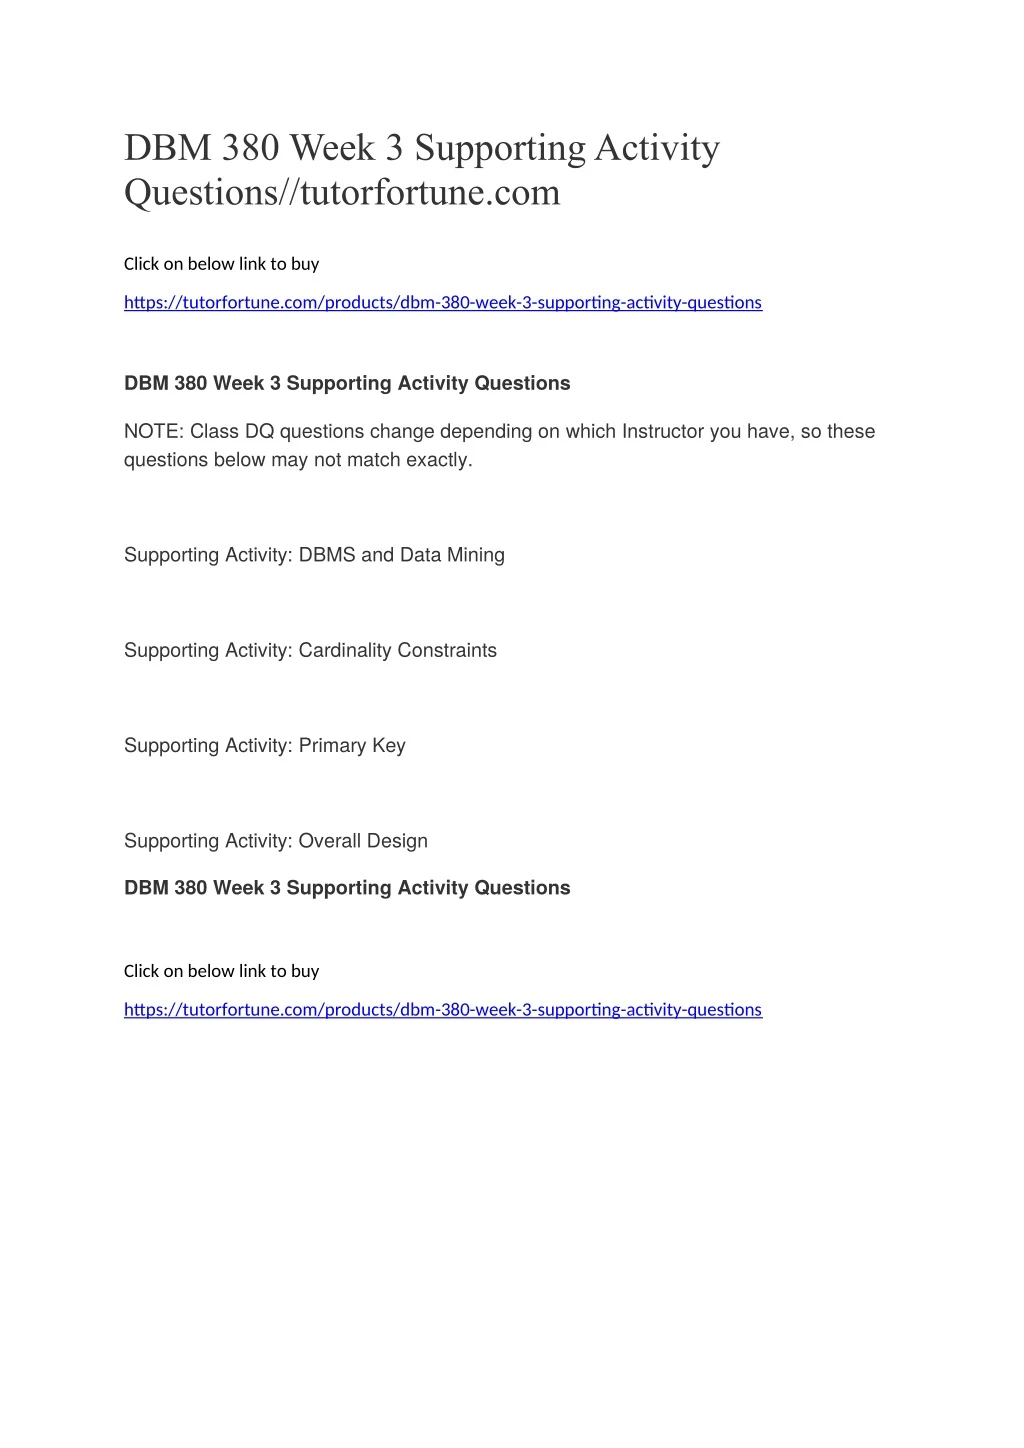 dbm 380 week 3 supporting activity questions